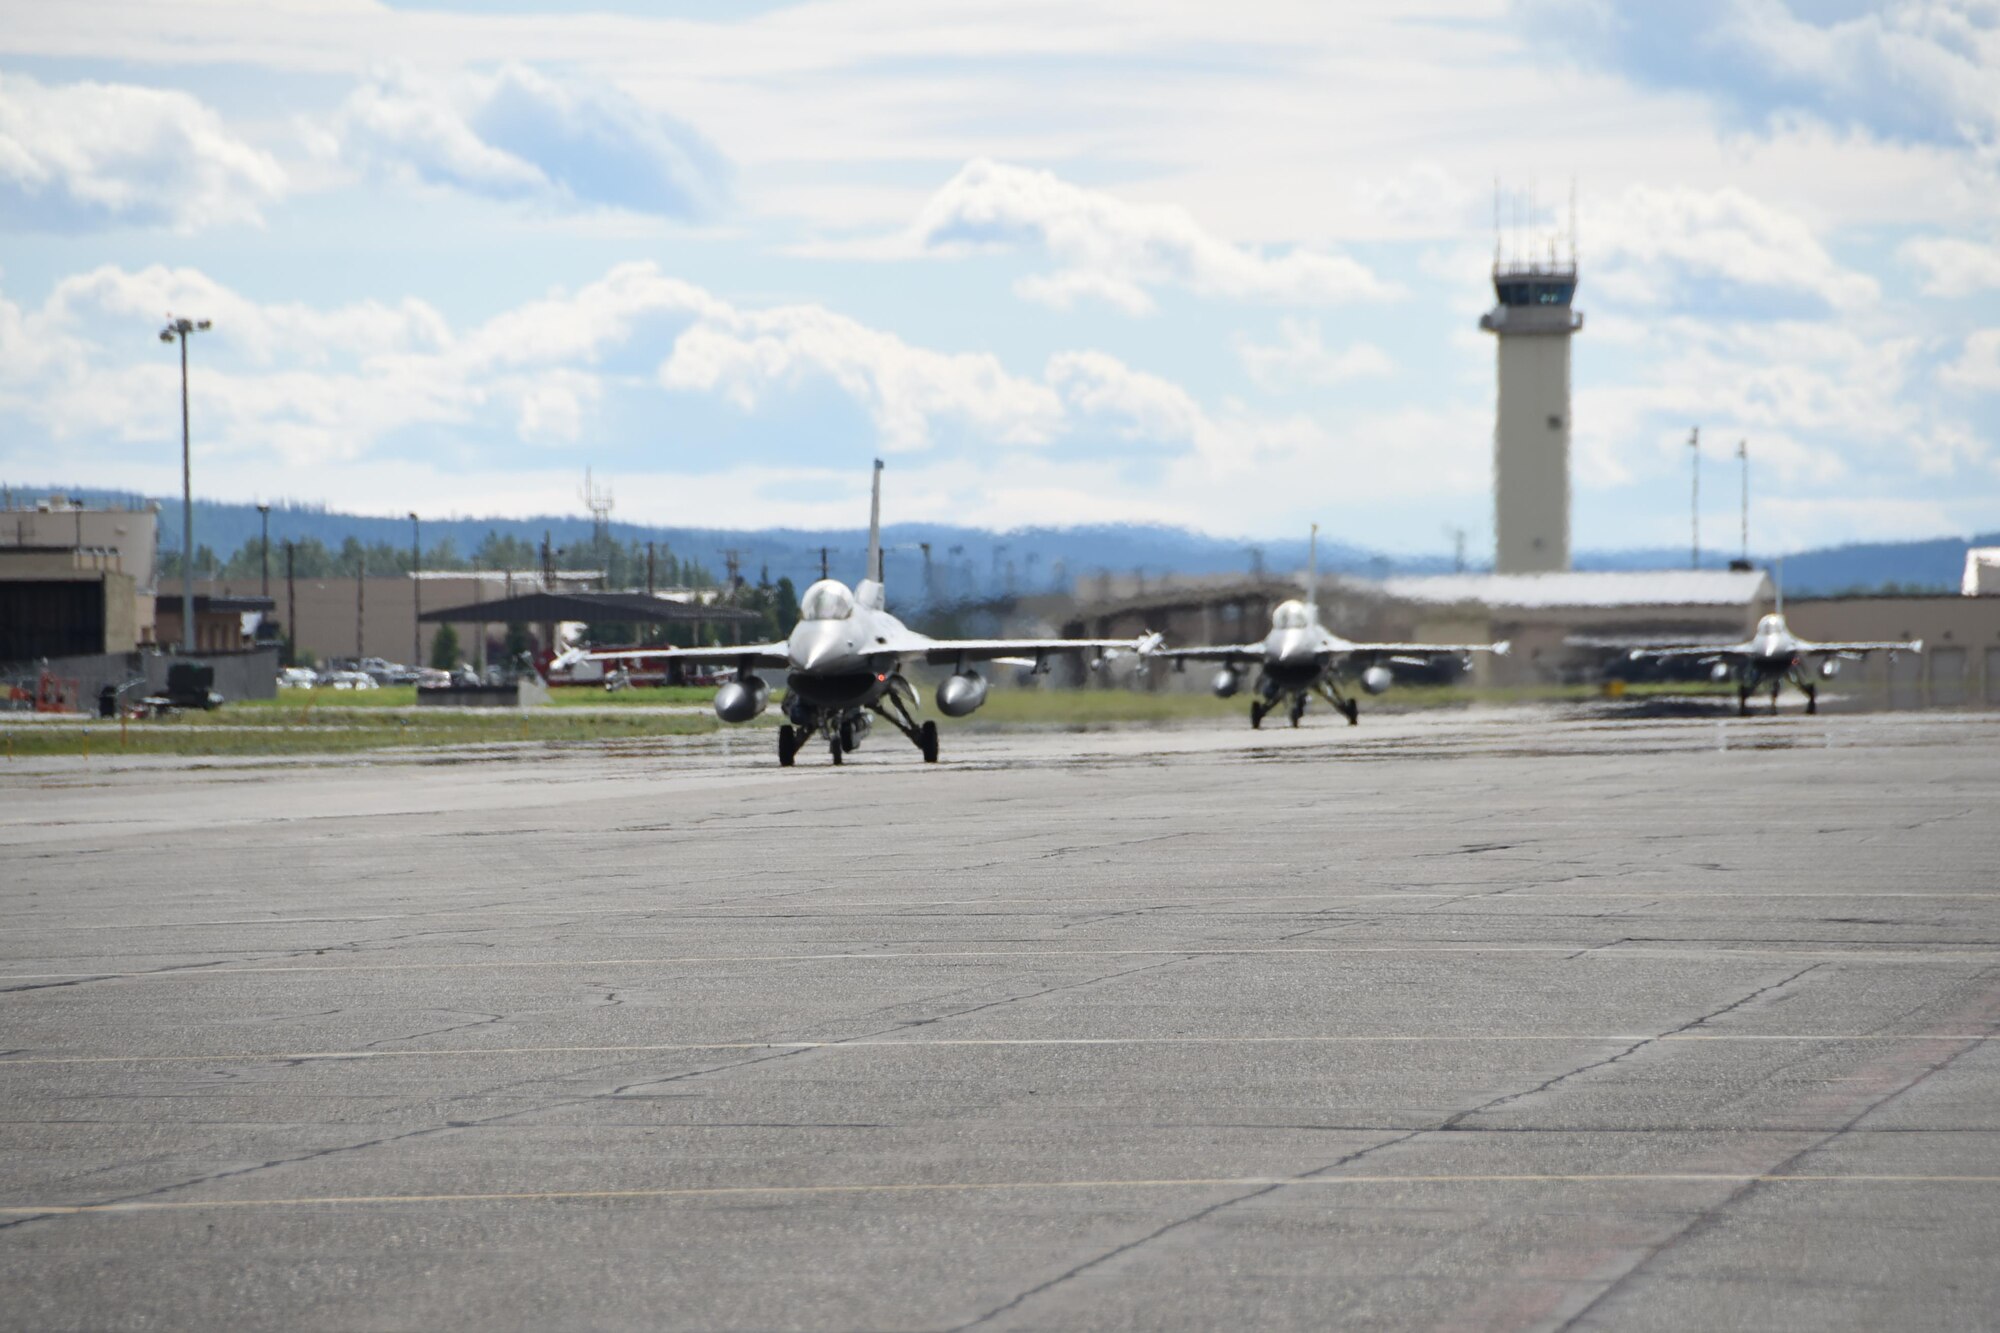 Three U.S. Air Force F-16 Fighting Falcons assigned to Kunsan Air Base, Republic of Korea, prepare to take-off from the runway during Red Flag-Alaska at Eielson Air Force Base, Alaska, Aug. 2, 2017. RF-A is a training exercise that provides joint offensive counter-air, interdiction, close air support and large force employment training in a simulated combat environment. (U.S. Air Force photo by Staff Sgt. Joshua Rosales)